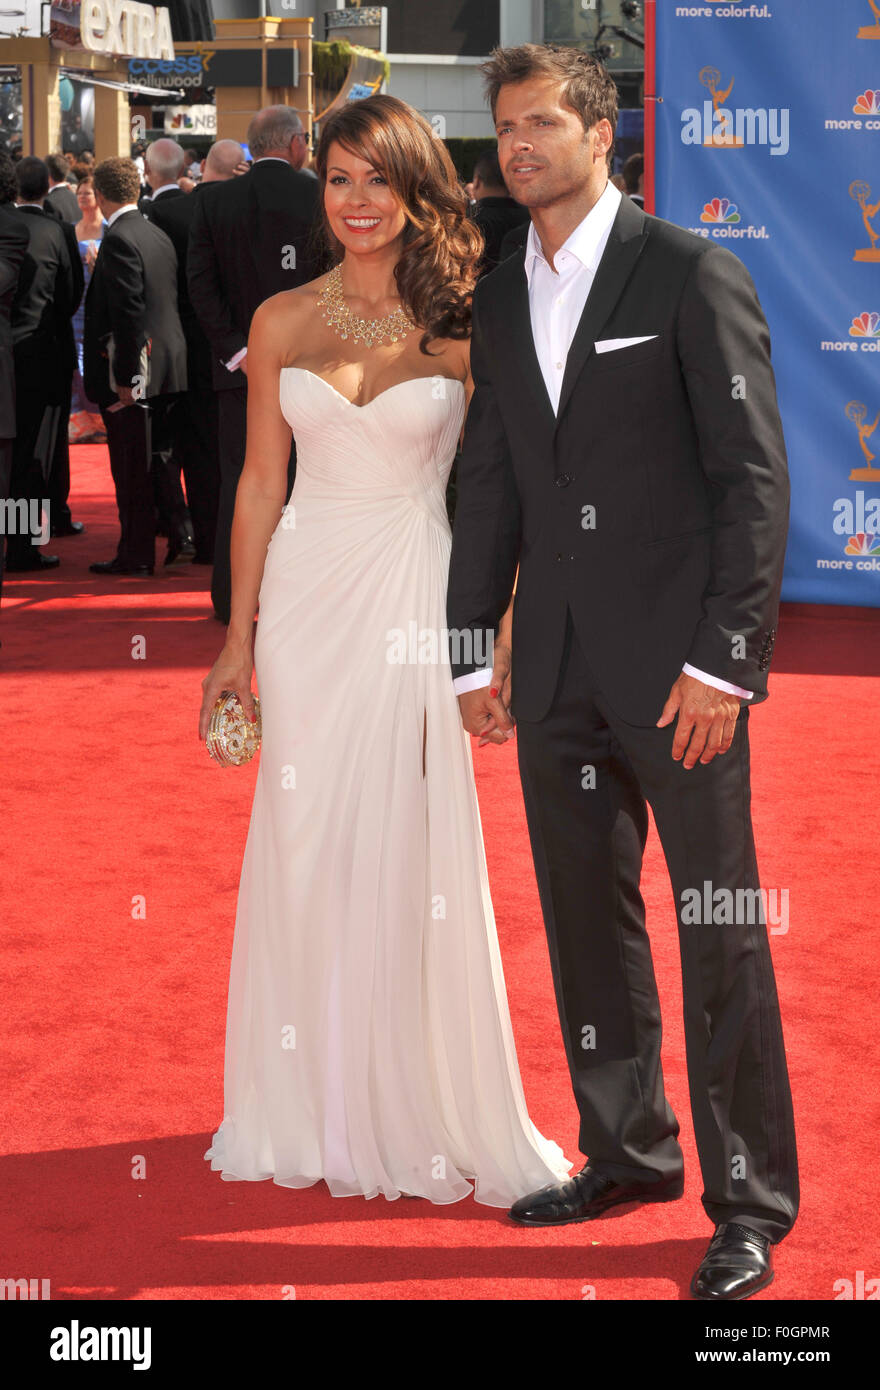 LOS ANGELES, CA - AUGUST 29, 2010: Brooke Burke & David Charvet at the 2010 Primetime Emmy Awards at the Nokia Theatre L.A. Live in downtown Los Angeles. Stock Photo